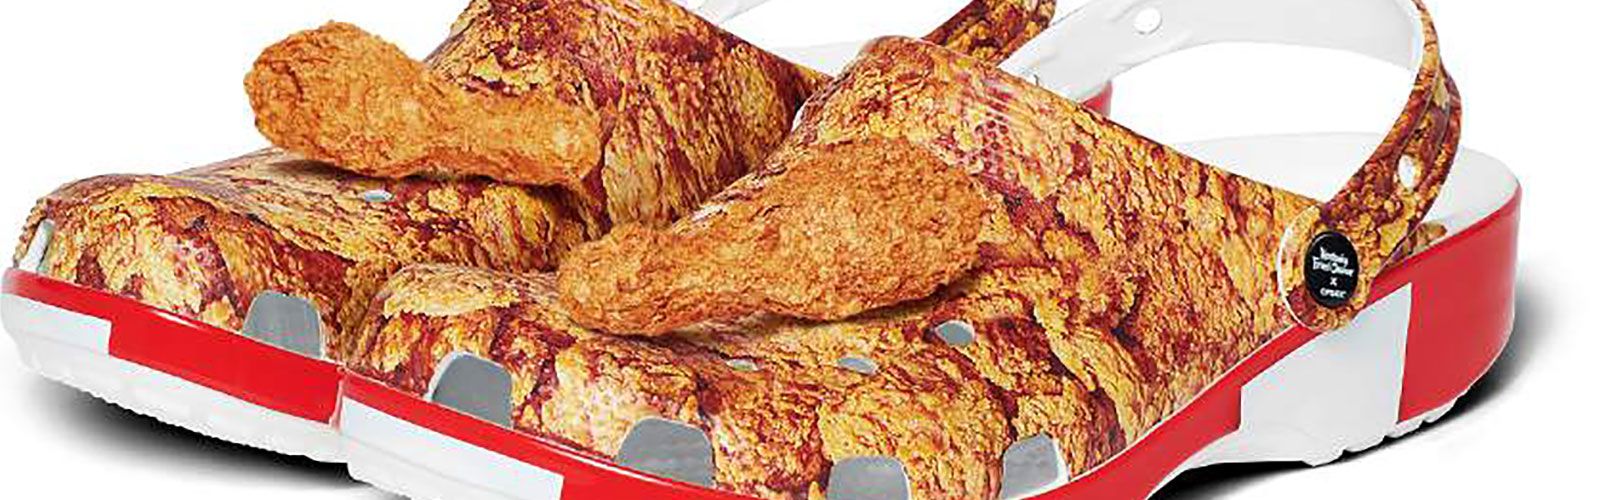 KFC and Crocs created a clog that's covered in fried chicken with a charm  that smells like it, too | CNN Business